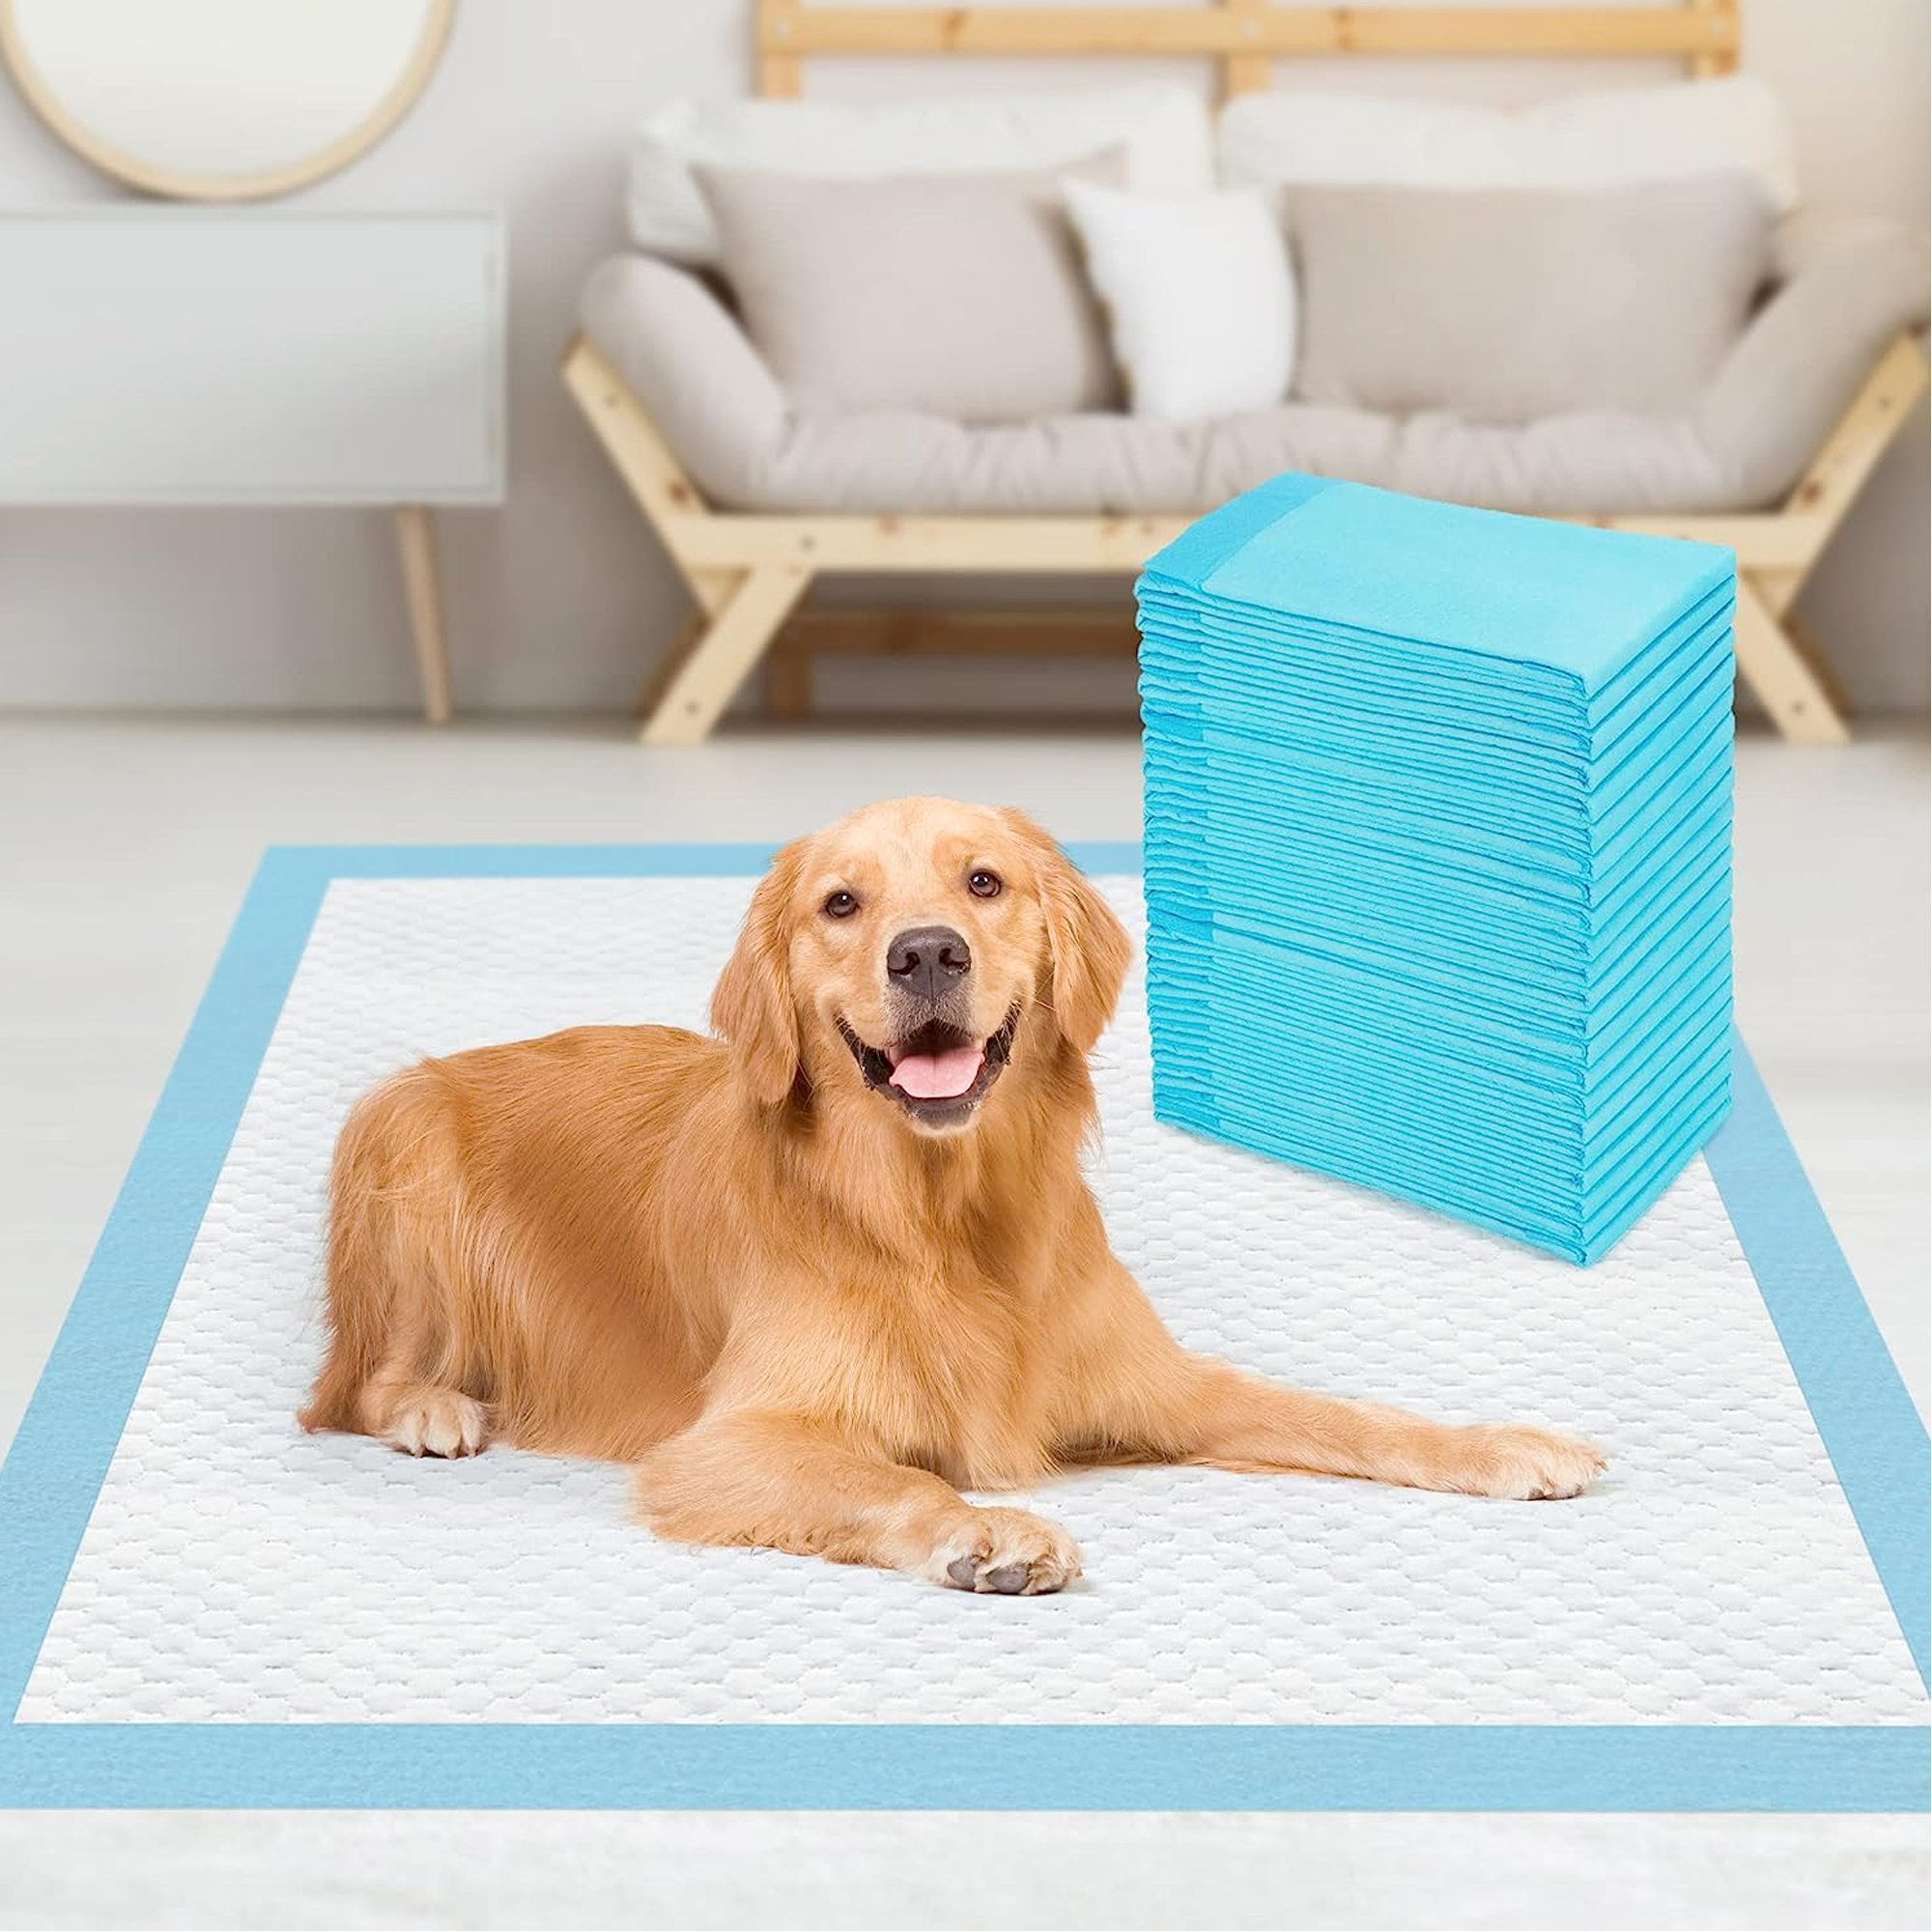 Puppy Pee Pads 23.6''X35.4''-20 Count | Dog Pee Training Pads Super  Absorbent & Leak-Proof | Disposable Pet Piddle And Potty Pads For Puppies |  Dogs 